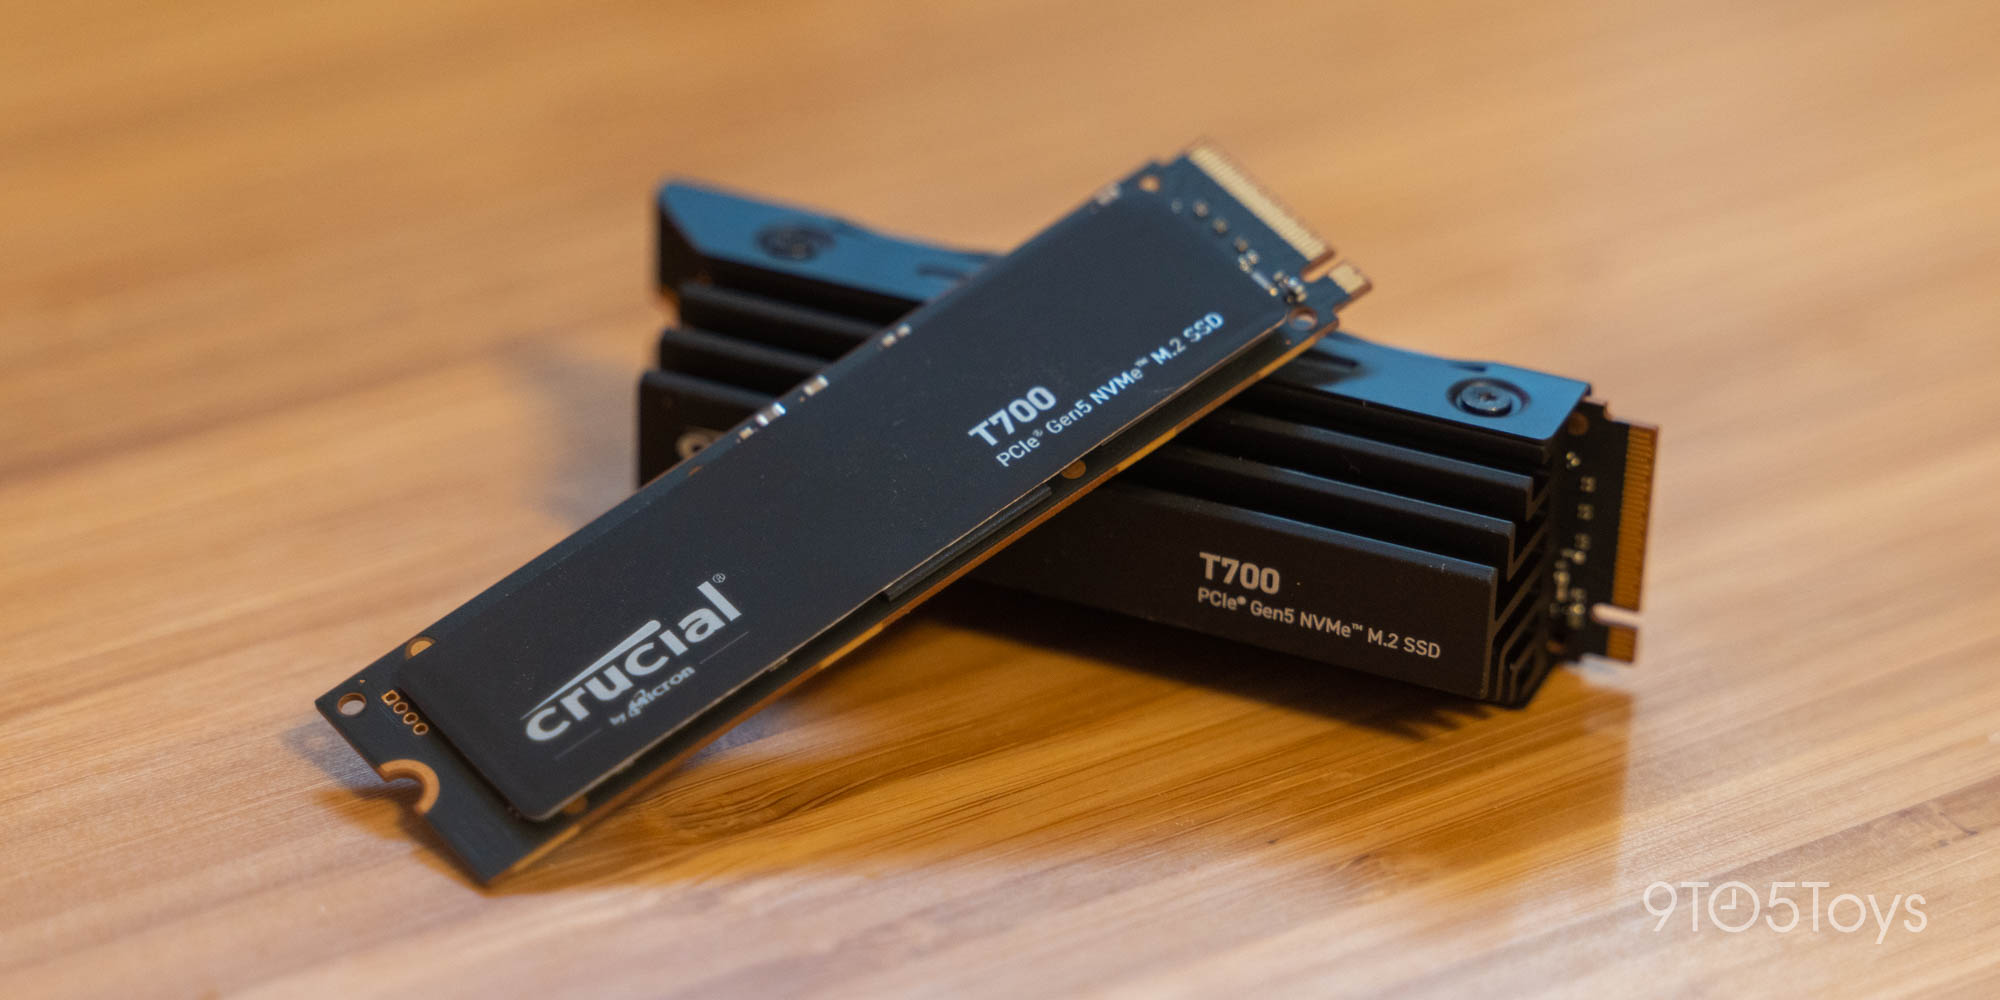 Gigabyte Tips PCIe Gen 5.0 SSD With 10,000MB/s Read and Write Speeds